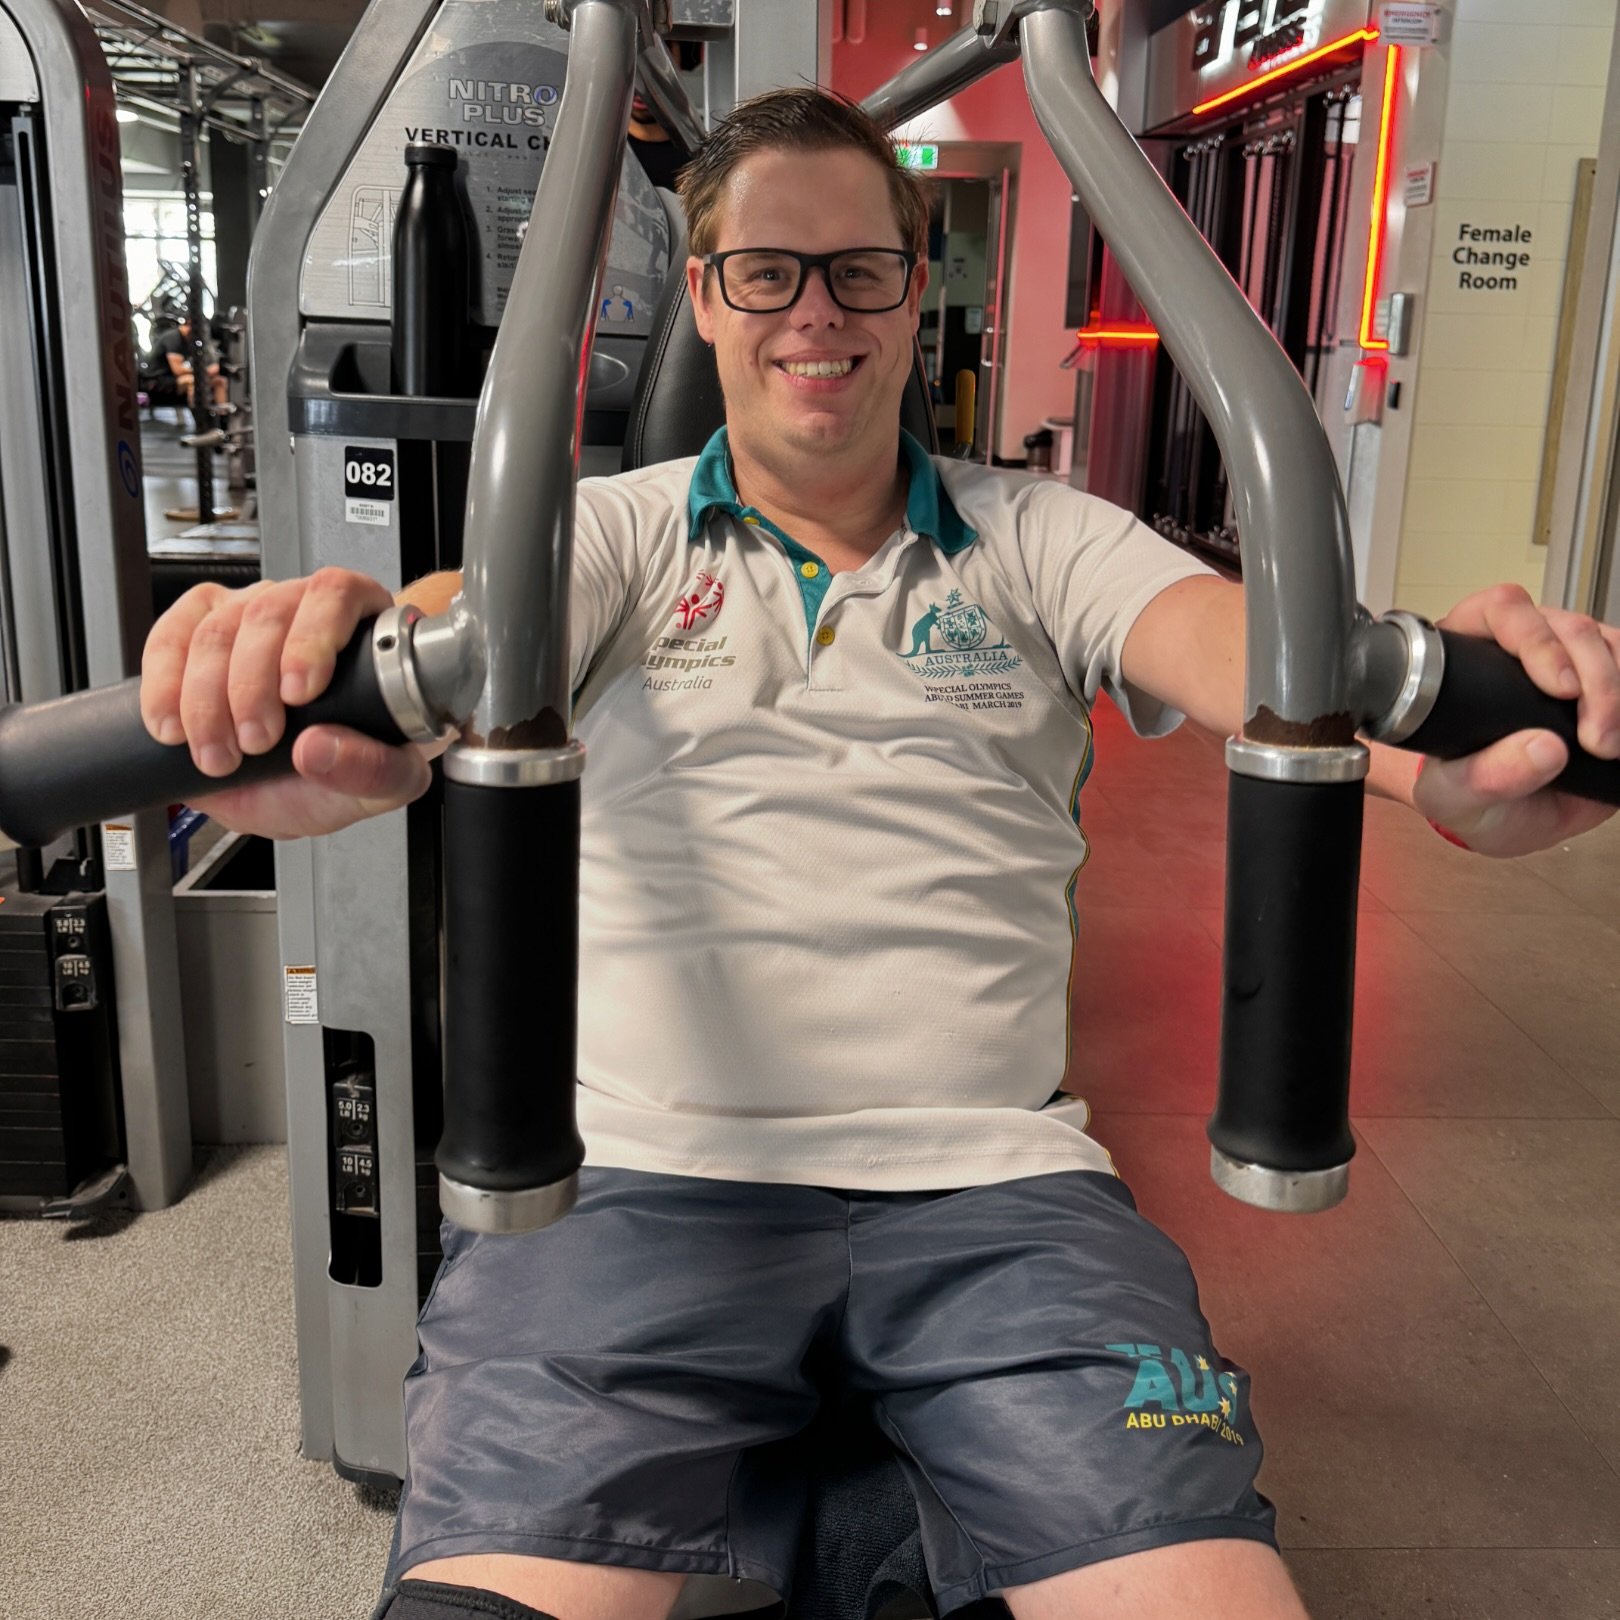 Crush your Monday like Jacob crushed his workout session.
.
.
.
.
#supportmates #mates #supportworker #specialneeds #upsyndrome #ndis #ndisprovider #gdd #awareness #support #autism #disability #additionalneeds #inclusion #accessibilityforall #accessi